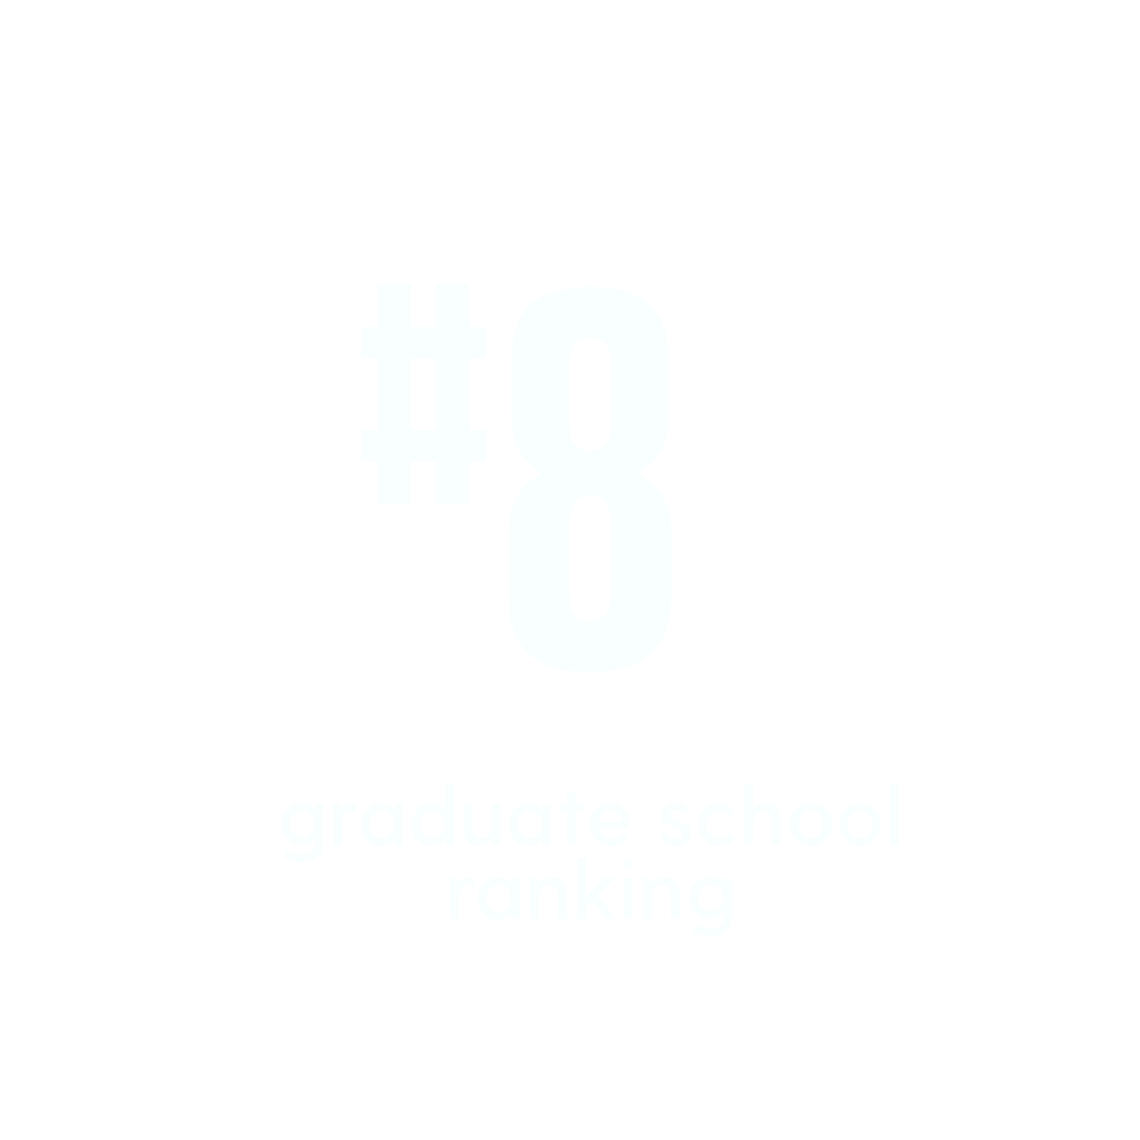 Ranked #8 in Graduate Chemical Engineering Programs by US News